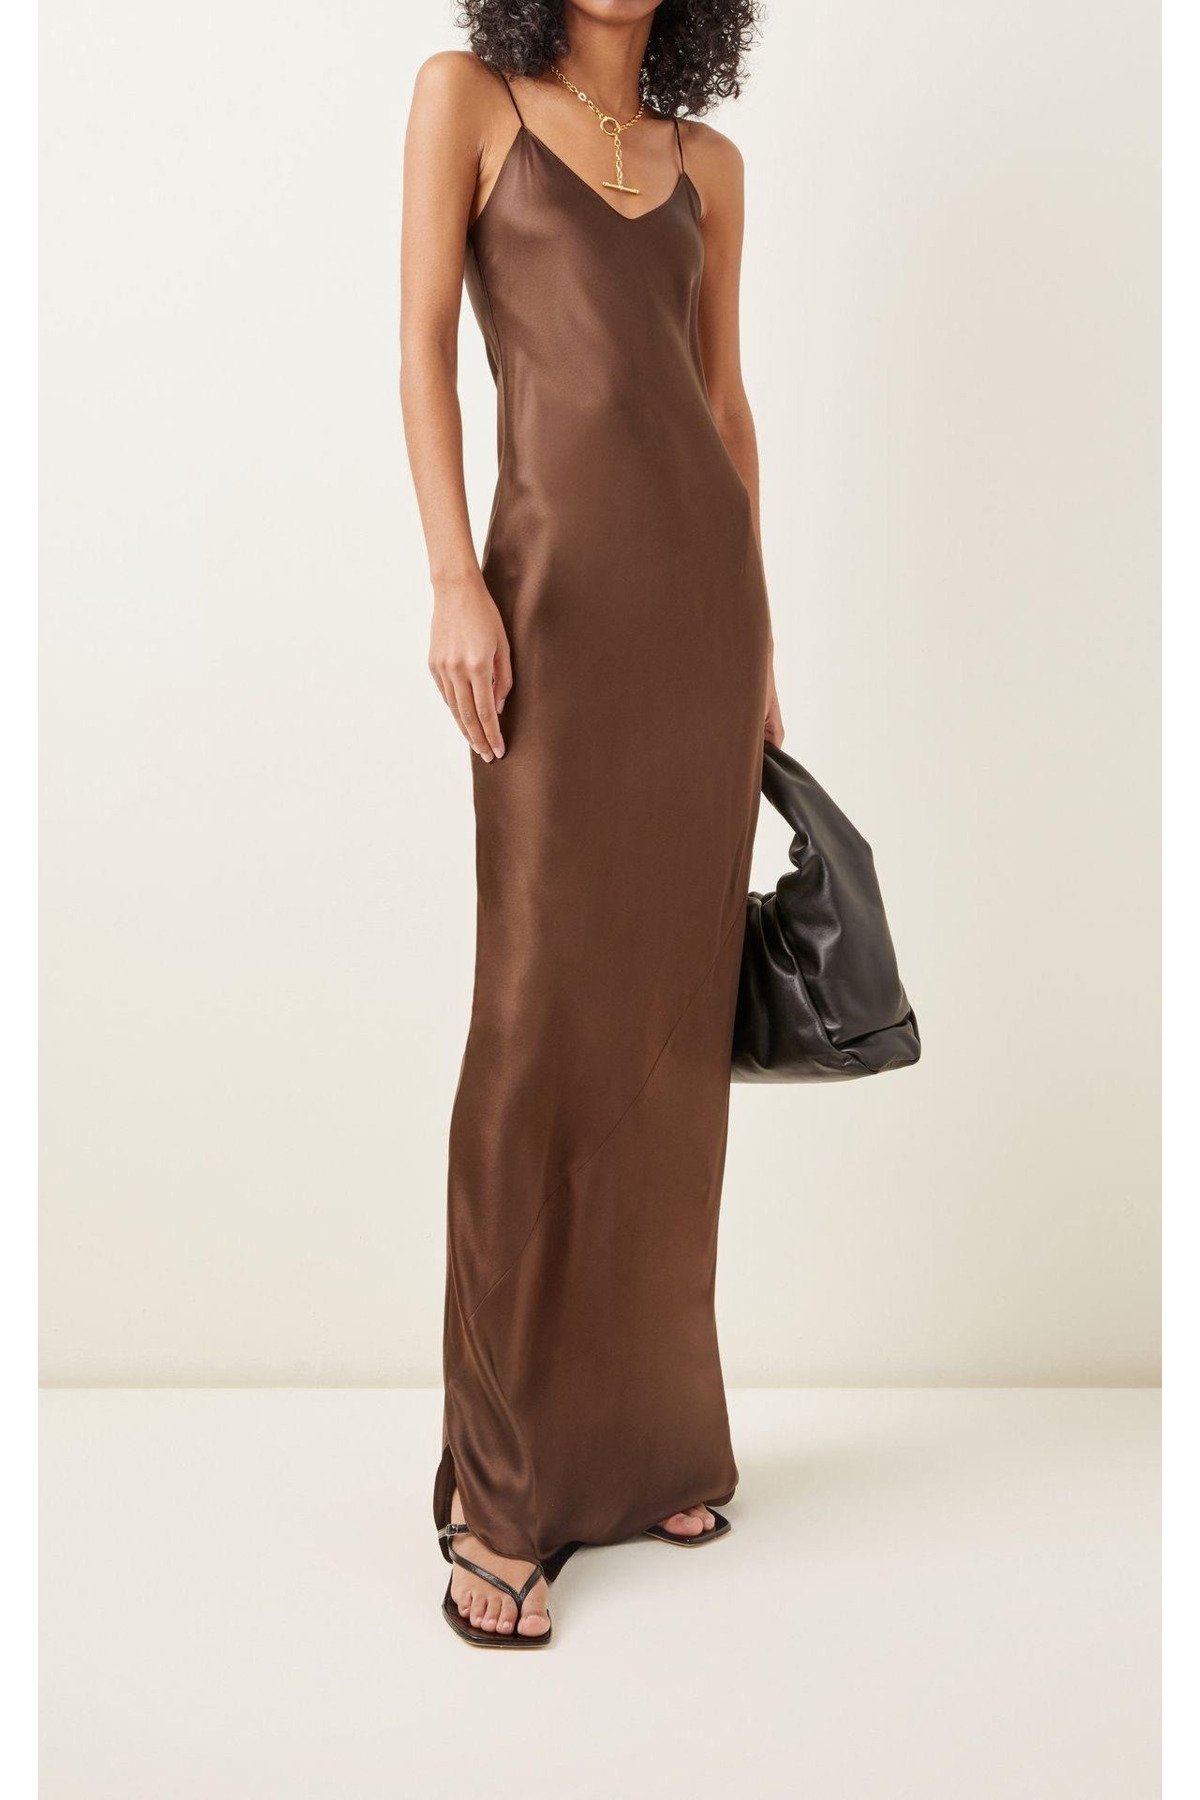 Laluvia Brown Ross Strappy Satin Dress